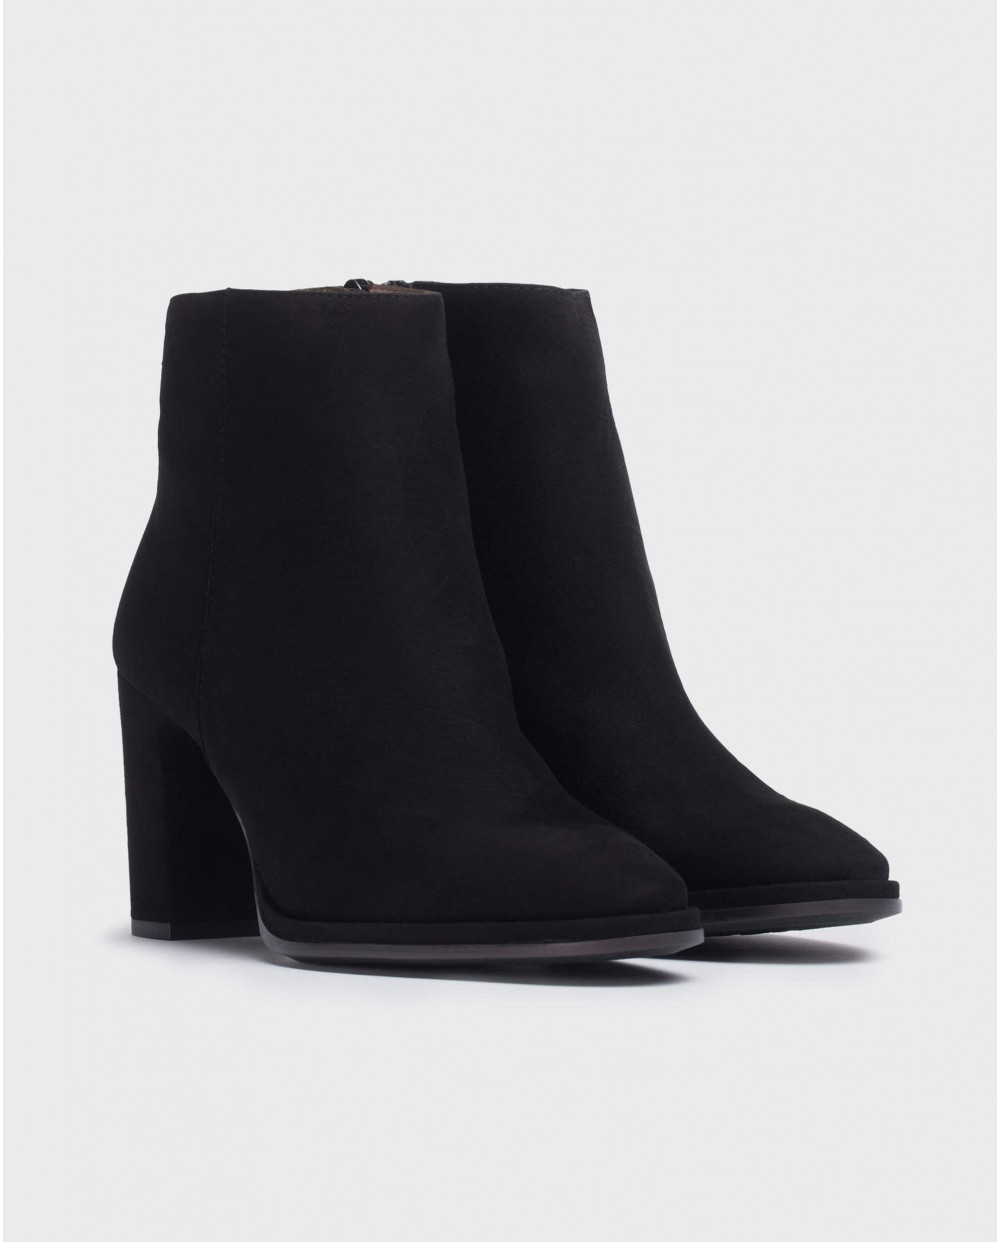 Wonders-Ankle Boots-Brown Ostro Ankle boot